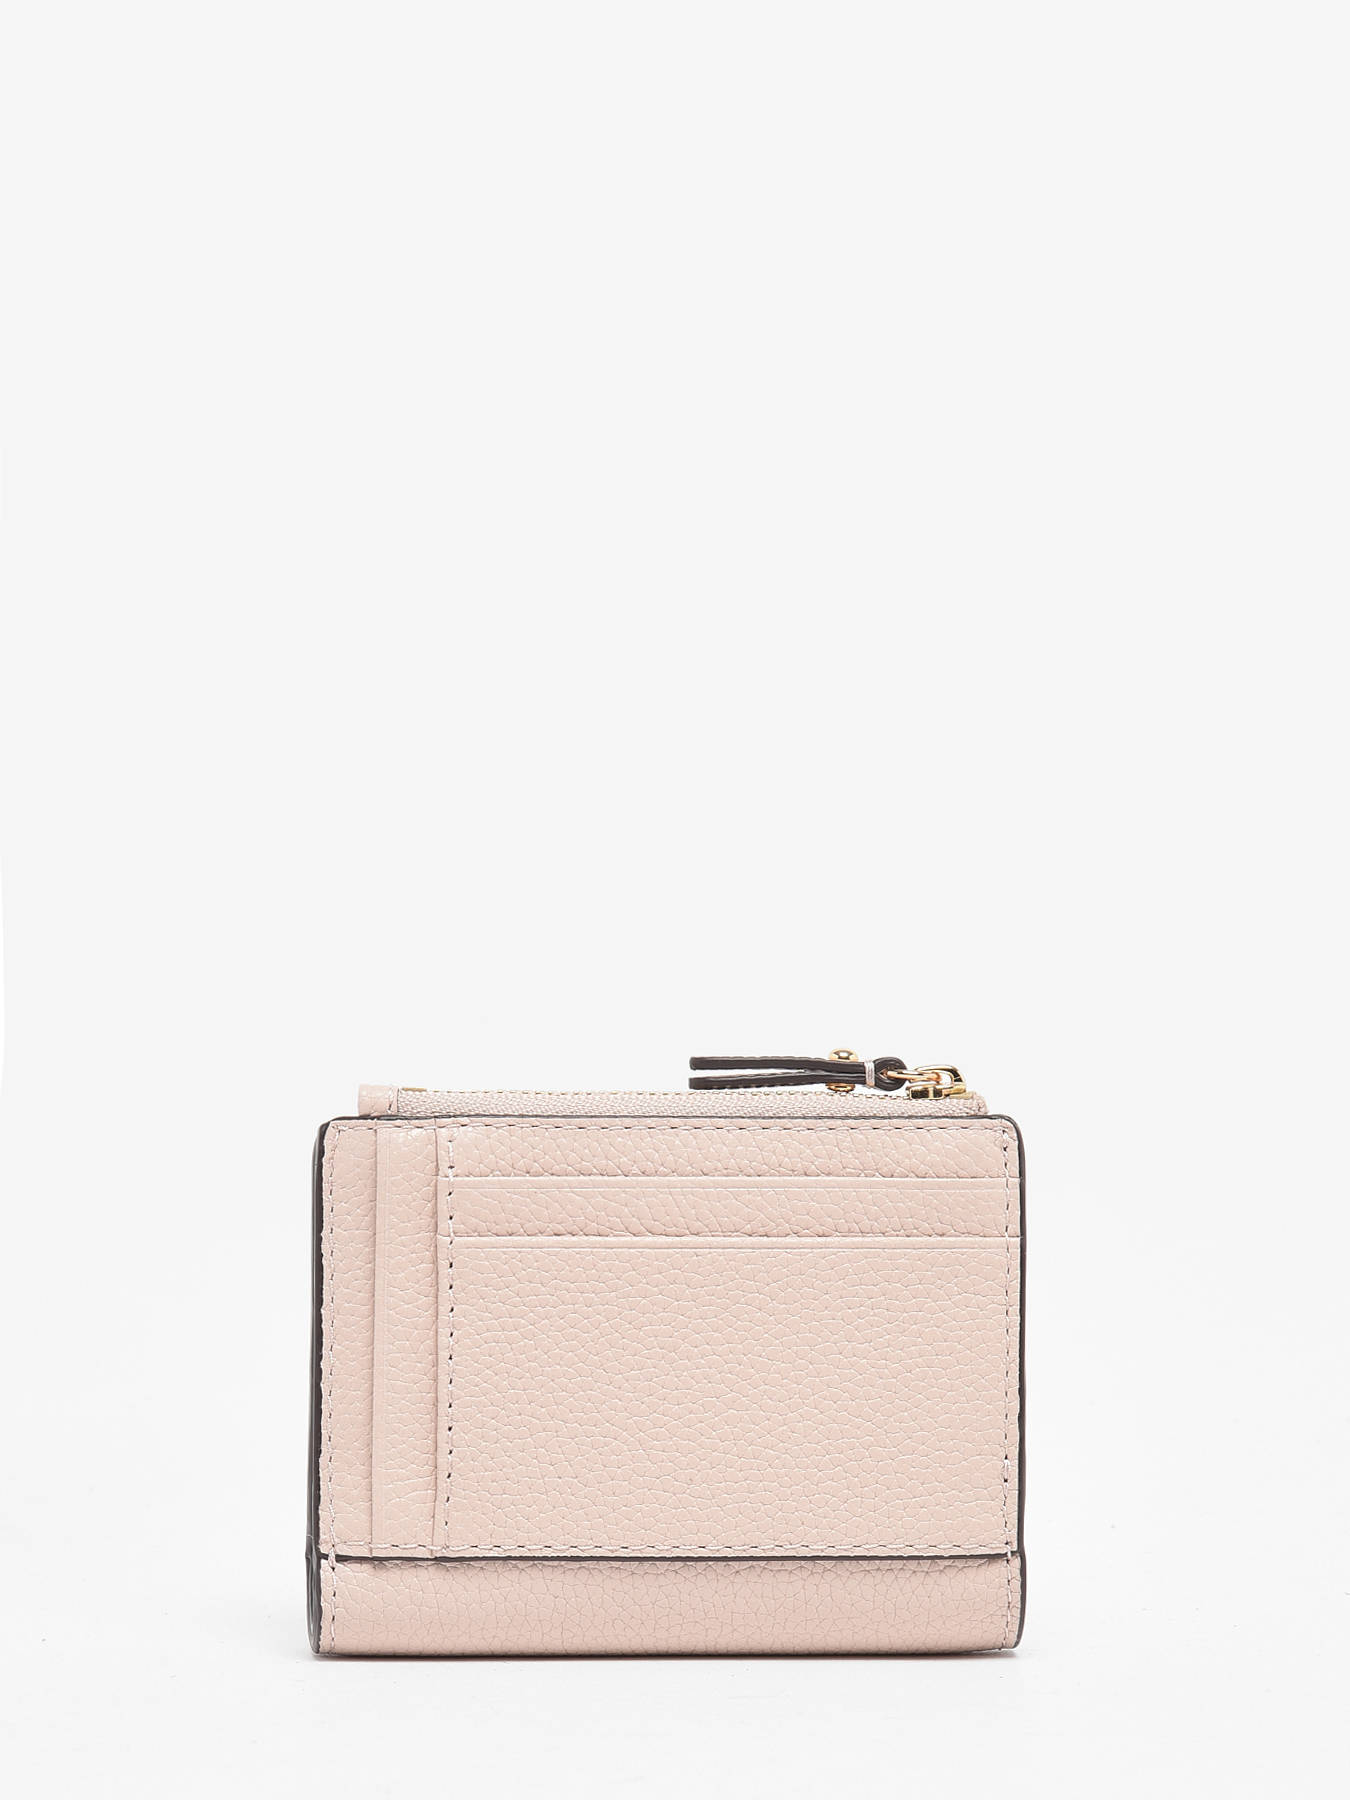 Michael Kors Pink Wallet  101 49 Off Retail  From Abby